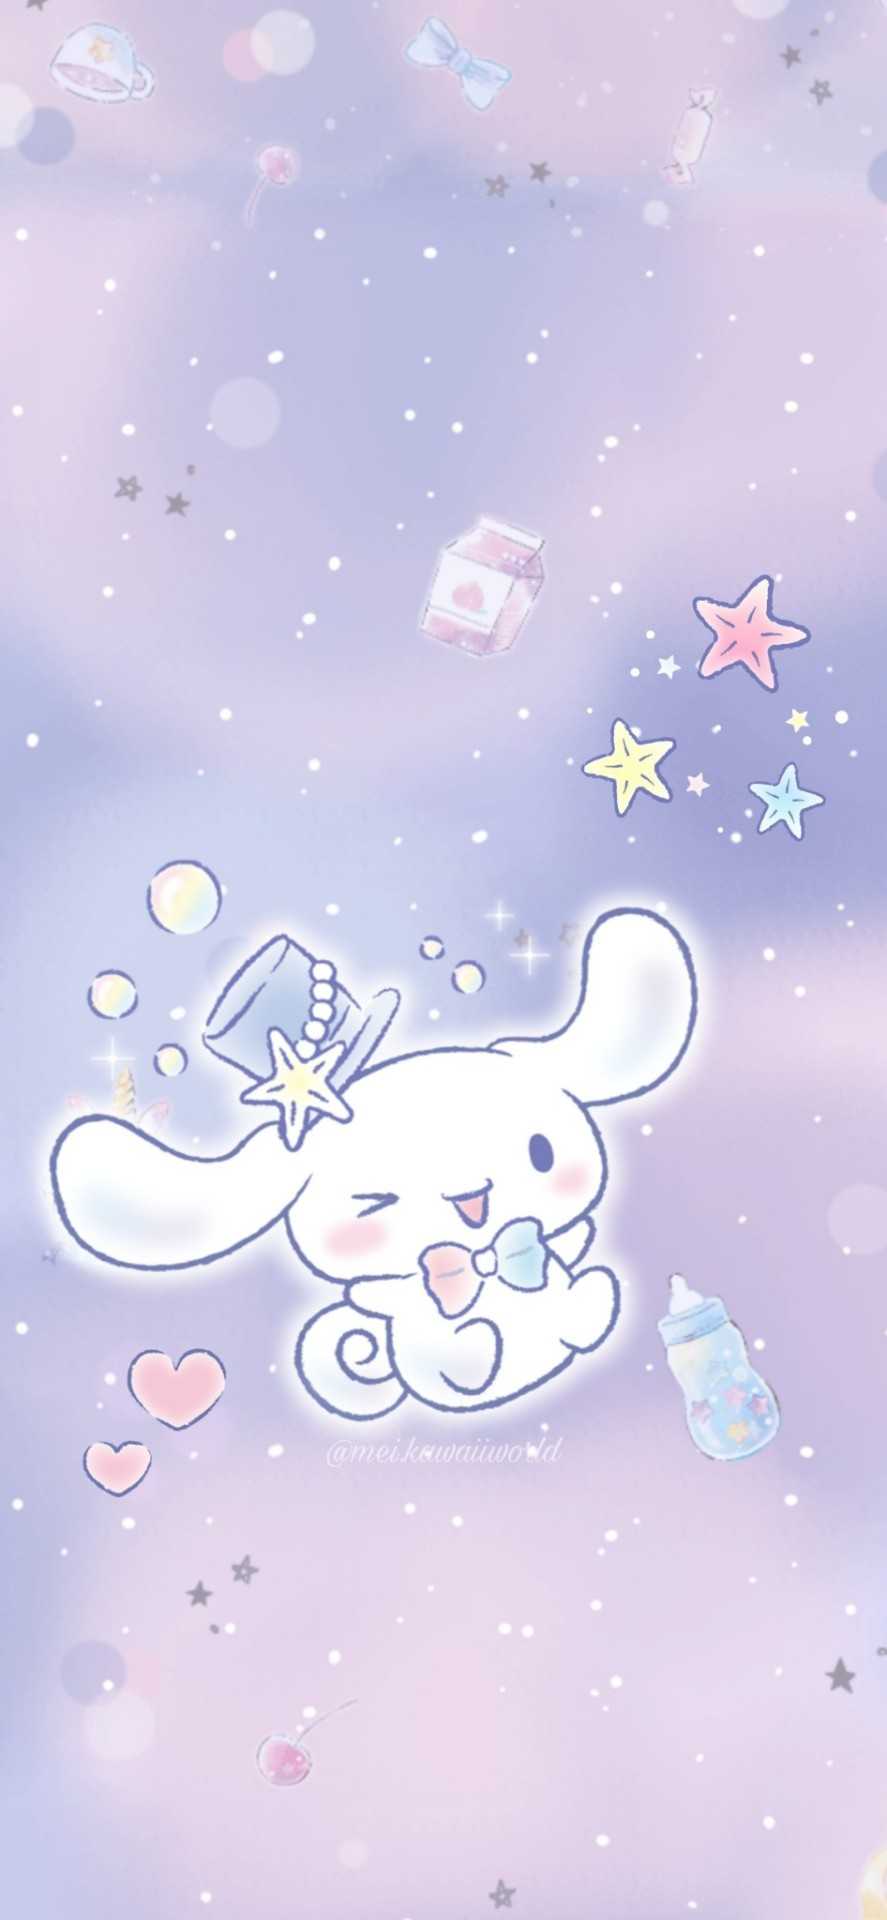 Wallpaper iPhone Sanrio Characters with high-resolution 1080x1920 pixel. You can use this wallpaper for your iPhone 5, 6, 7, 8, X, XS, XR backgrounds, Mobile Screensaver, or iPad Lock Screen - Sanrio